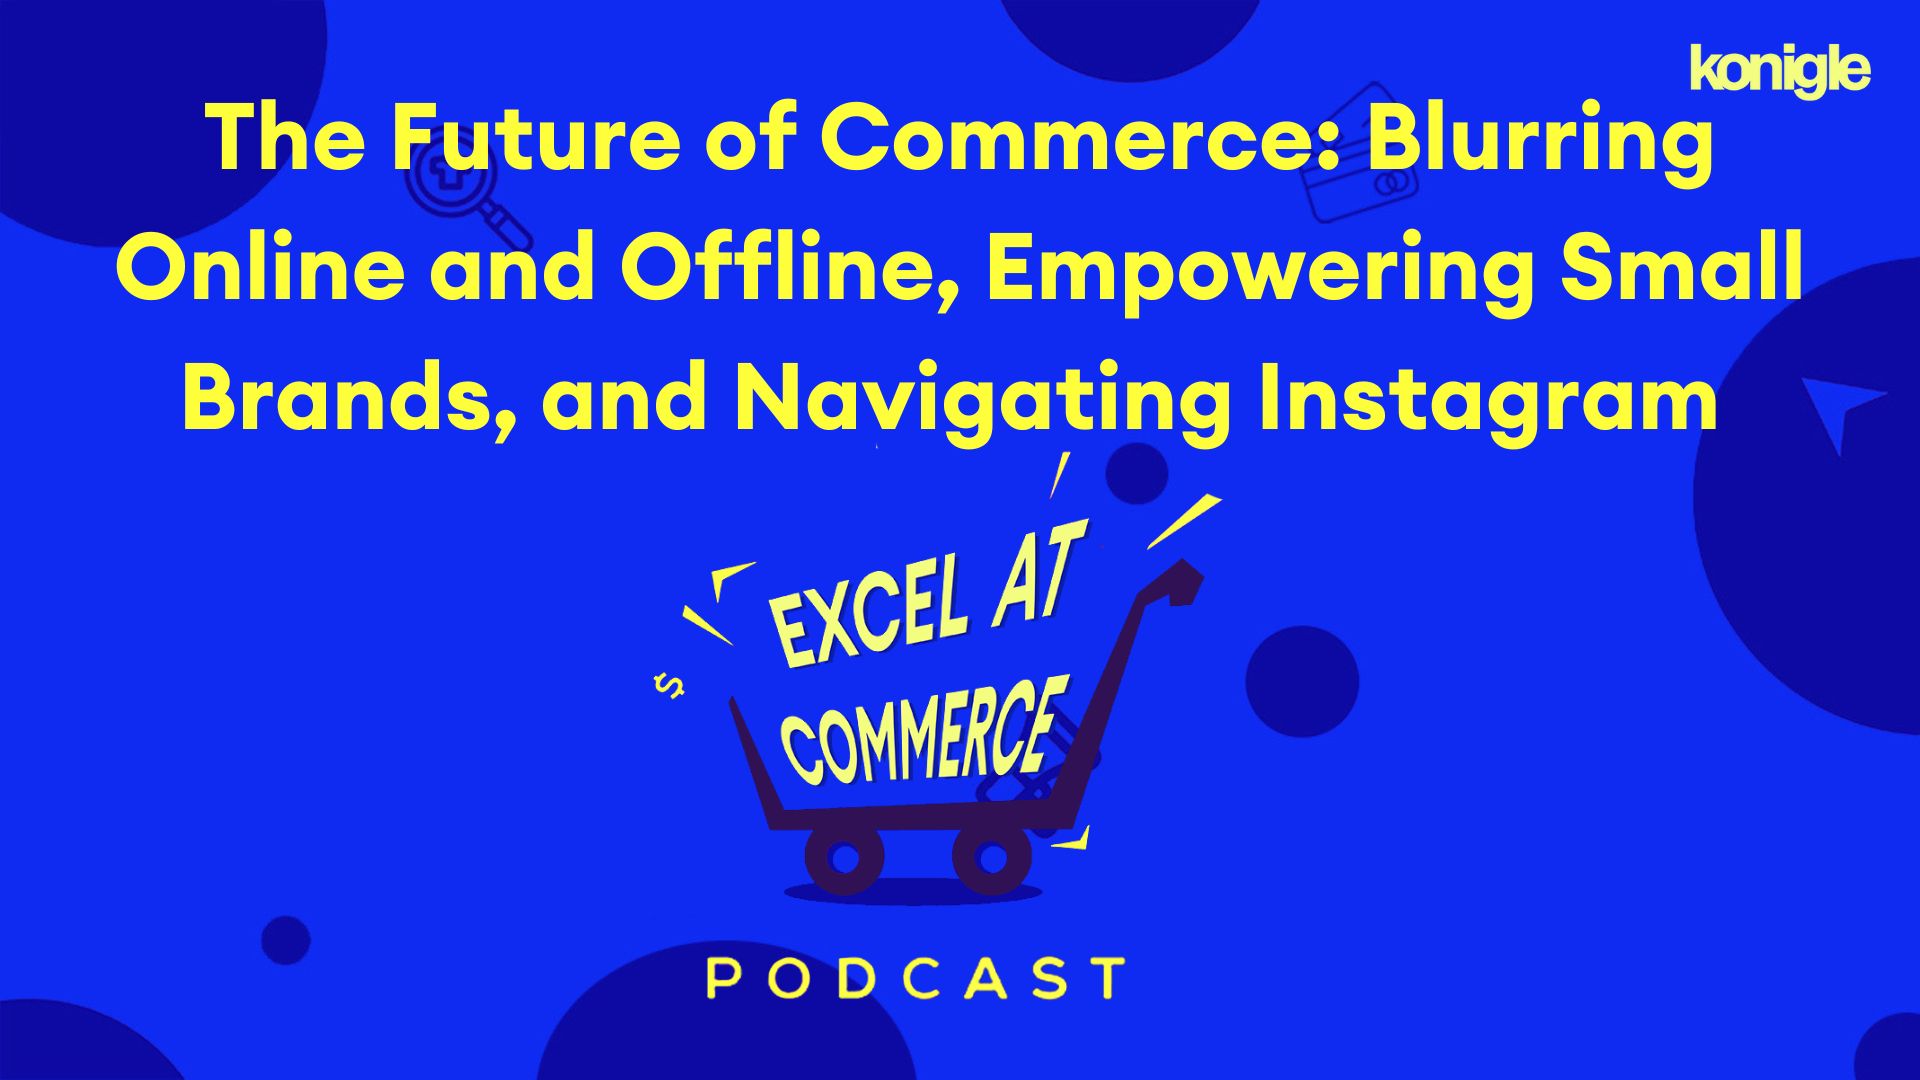 The Future of Commerce: Blurring Online and Offline, Empowering Small Brands, and Navigating Instagram